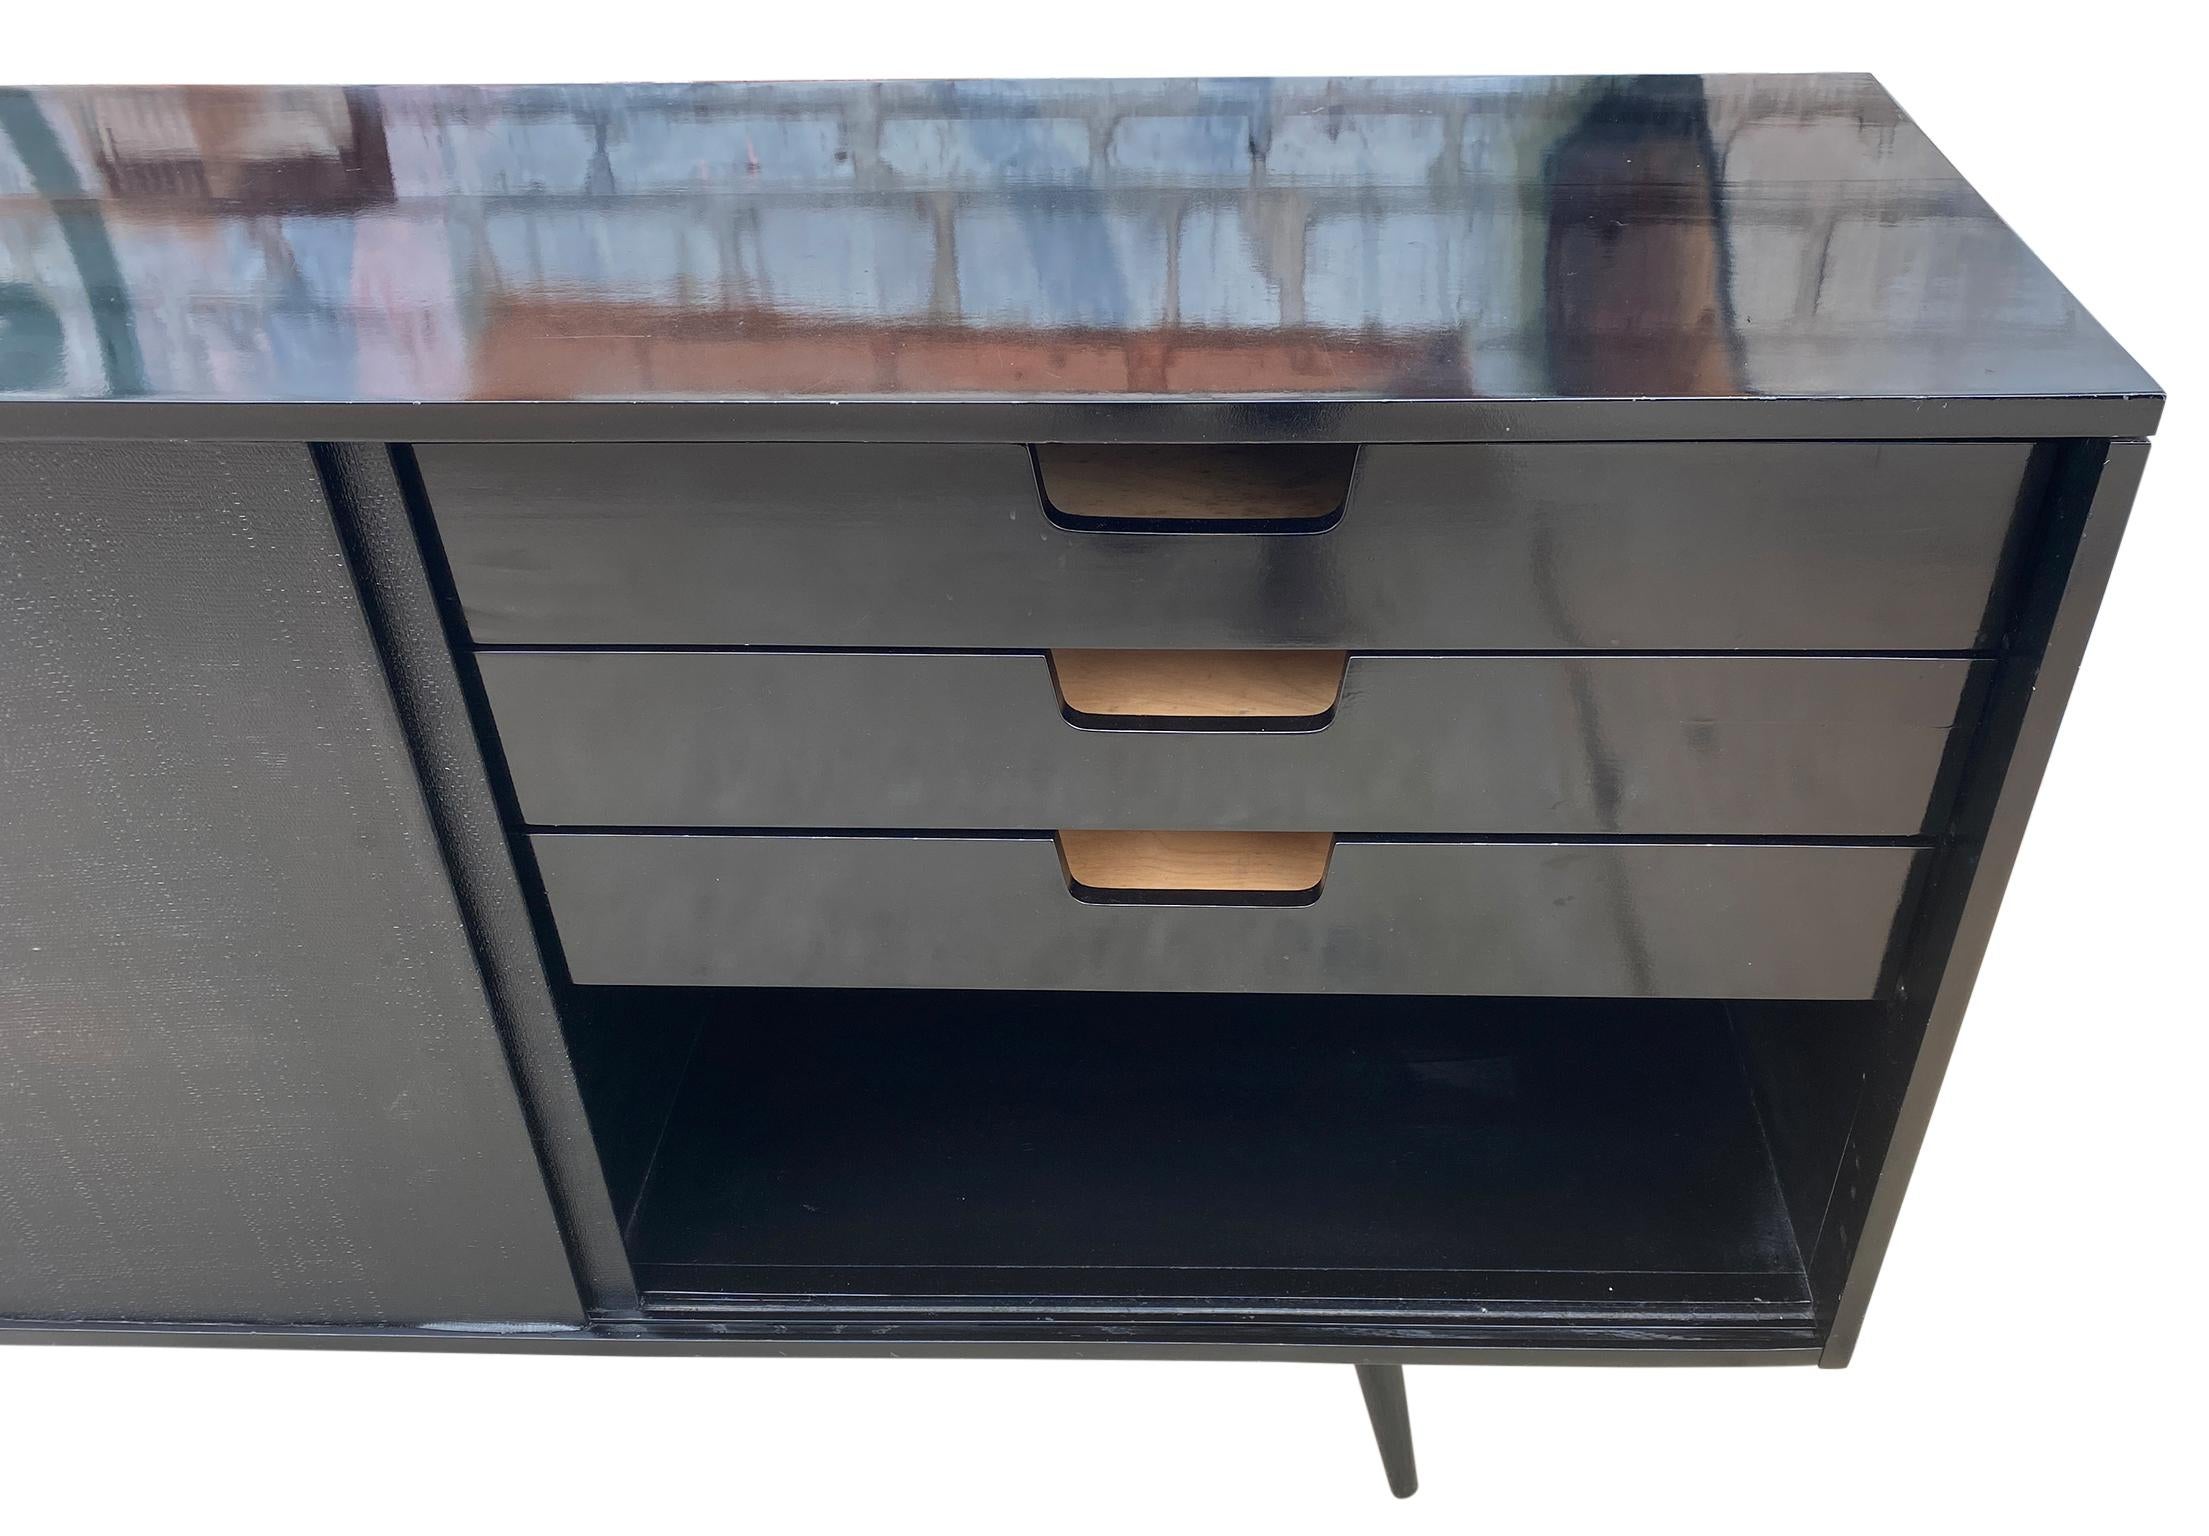 20th Century Midcentury All Black Credenza Paul McCobb Planner Group #1514 Black Lacquer For Sale